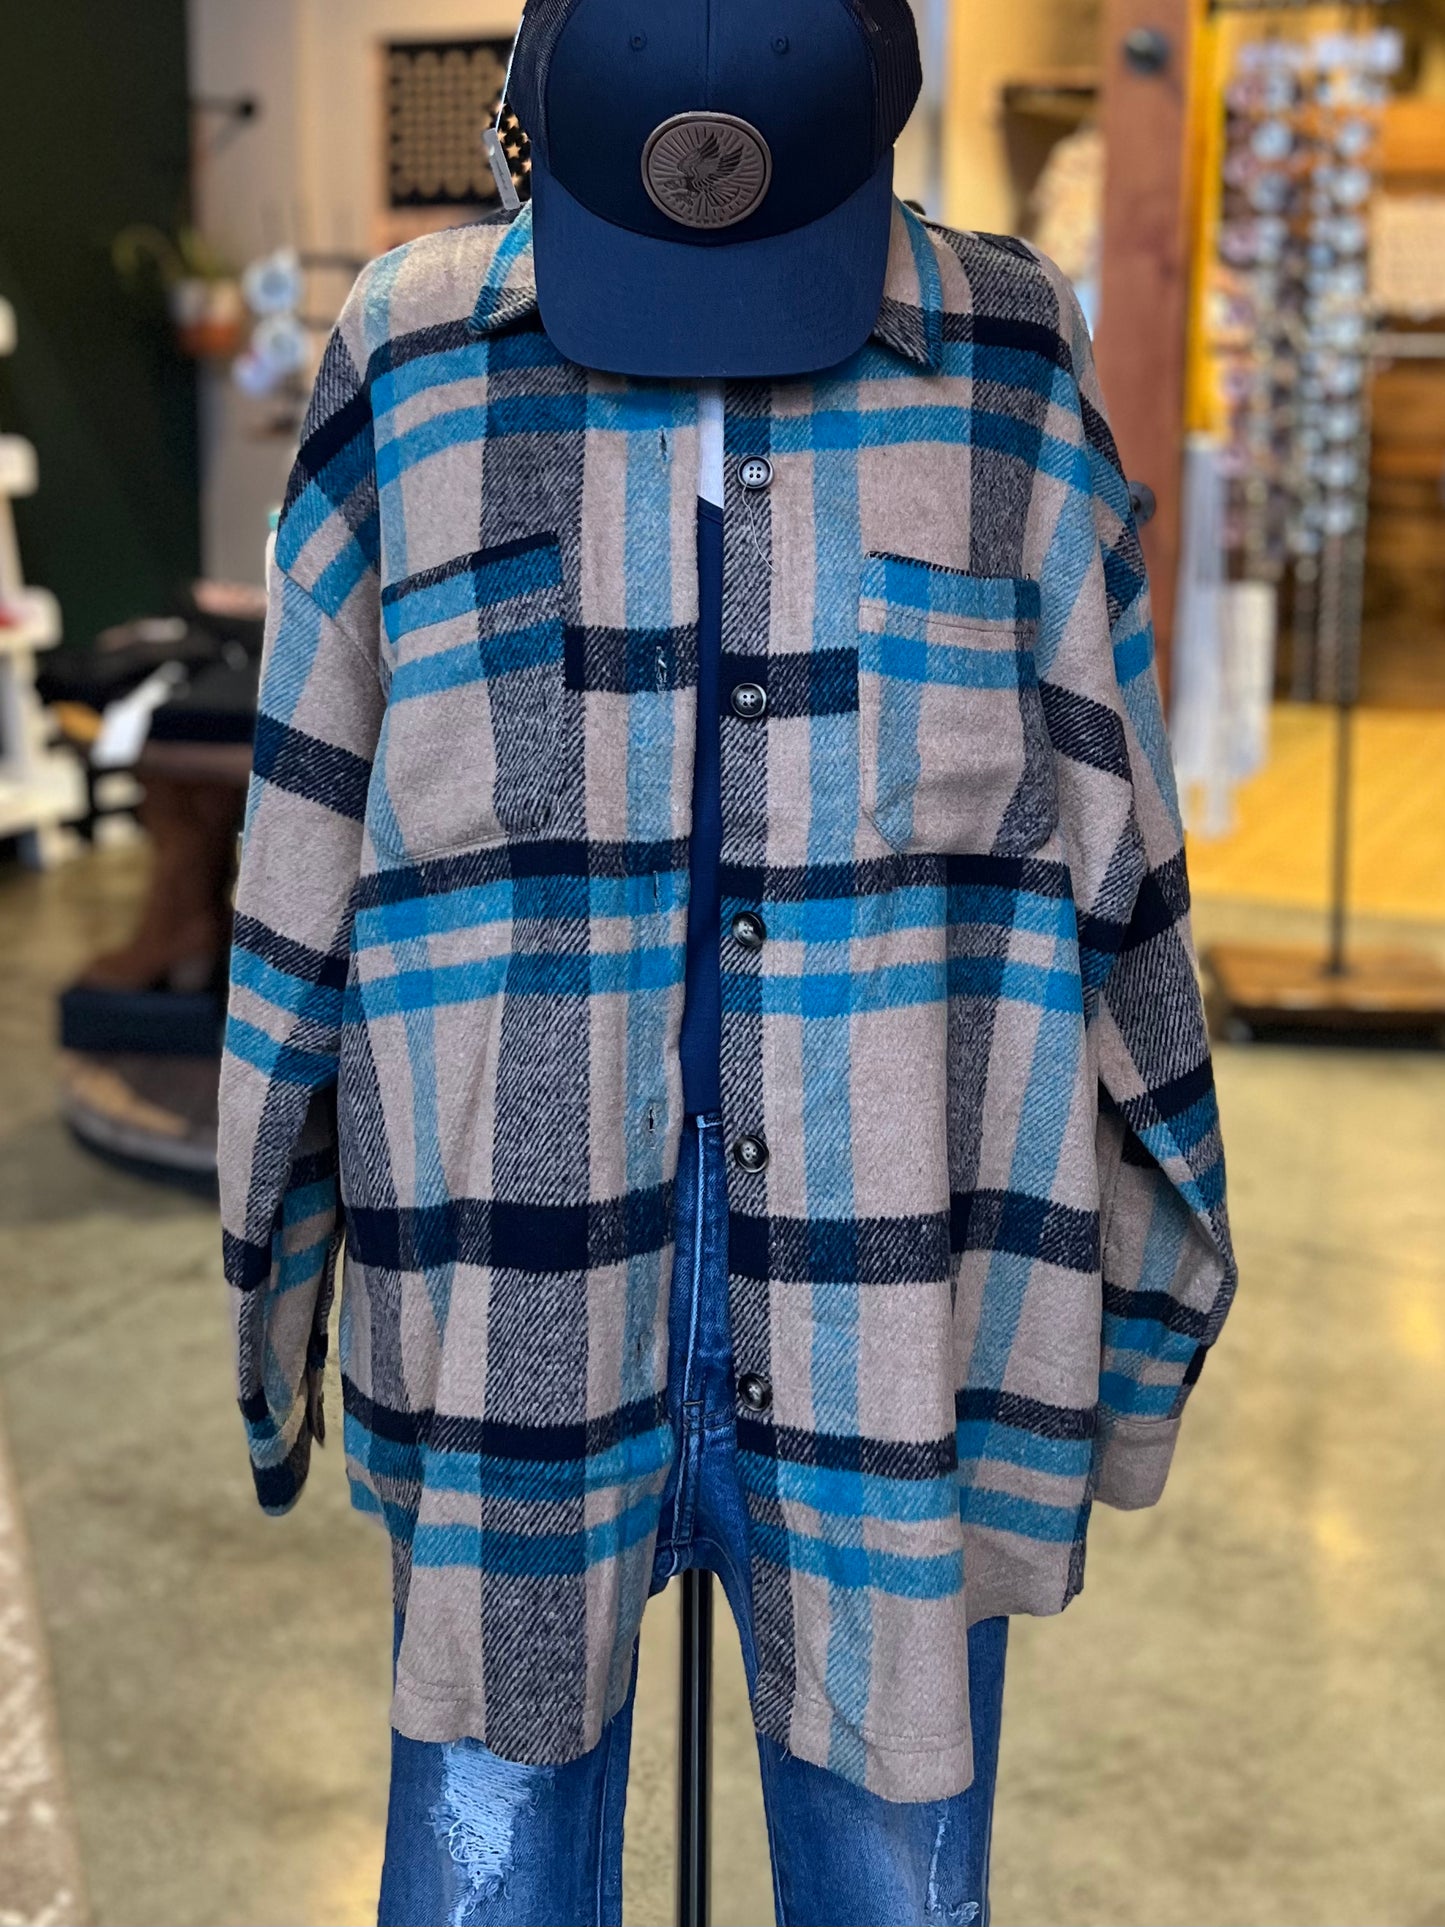 Heavy Teal and Tan Flannel